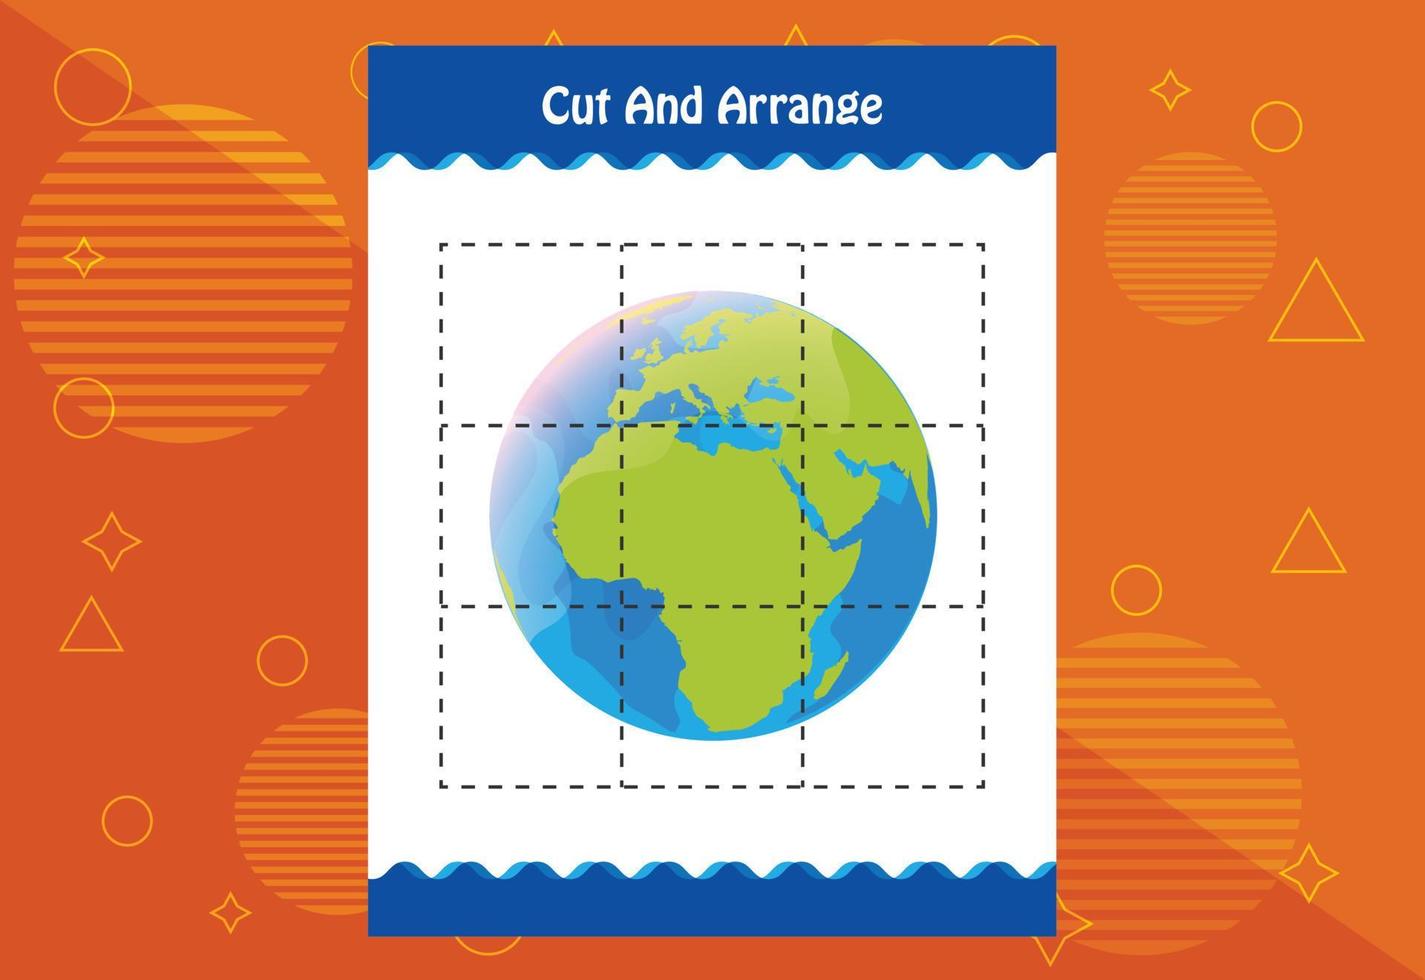 Cut and arrange with a planet worksheet for kids. Educational game for children vector